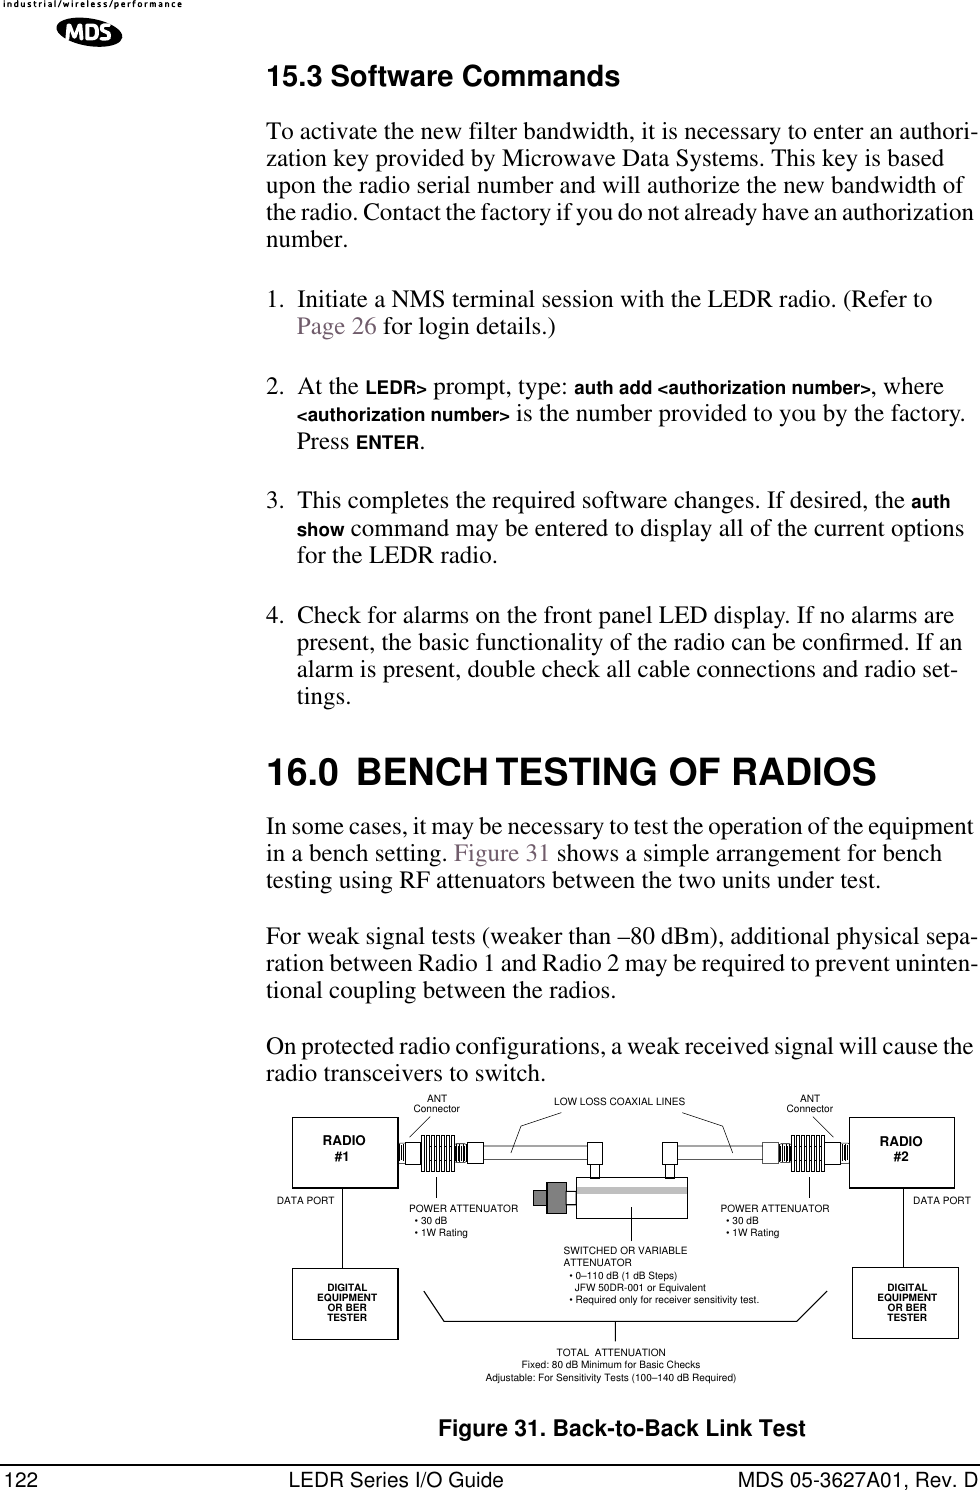 122 LEDR Series I/O Guide MDS 05-3627A01, Rev. D15.3 Software CommandsTo activate the new filter bandwidth, it is necessary to enter an authori-zation key provided by Microwave Data Systems. This key is based upon the radio serial number and will authorize the new bandwidth of the radio. Contact the factory if you do not already have an authorization number.1. Initiate a NMS terminal session with the LEDR radio. (Refer to Page 26 for login details.)2. At the LEDR&gt; prompt, type: auth add &lt;authorization number&gt;, where &lt;authorization number&gt; is the number provided to you by the factory. Press ENTER.3. This completes the required software changes. If desired, the auth show command may be entered to display all of the current options for the LEDR radio.4. Check for alarms on the front panel LED display. If no alarms are present, the basic functionality of the radio can be conﬁrmed. If an alarm is present, double check all cable connections and radio set-tings.16.0 BENCH TESTING OF RADIOSIn some cases, it may be necessary to test the operation of the equipment in a bench setting. Figure 31 shows a simple arrangement for bench testing using RF attenuators between the two units under test. For weak signal tests (weaker than –80 dBm), additional physical sepa-ration between Radio 1 and Radio 2 may be required to prevent uninten-tional coupling between the radios. On protected radio configurations, a weak received signal will cause the radio transceivers to switch. Figure 31. Back-to-Back Link TestANTConnector ANTConnectorPOWER ATTENUATOR  • 30 dB  • 1W RatingPOWER ATTENUATOR  • 30 dB  • 1W RatingSWITCHED OR VARIABLEATTENUATOR  • 0–110 dB (1 dB Steps)    JFW 50DR-001 or Equivalent  • Required only for receiver sensitivity test.LOW LOSS COAXIAL LINESDIGITALEQUIPMENTOR BERTESTER RADIO#1DATA PORTTOTAL  ATTENUATIONFixed: 80 dB Minimum for Basic ChecksAdjustable: For Sensitivity Tests (100–140 dB Required)DIGITALEQUIPMENTOR BERTESTERDATA PORTRADIO#2